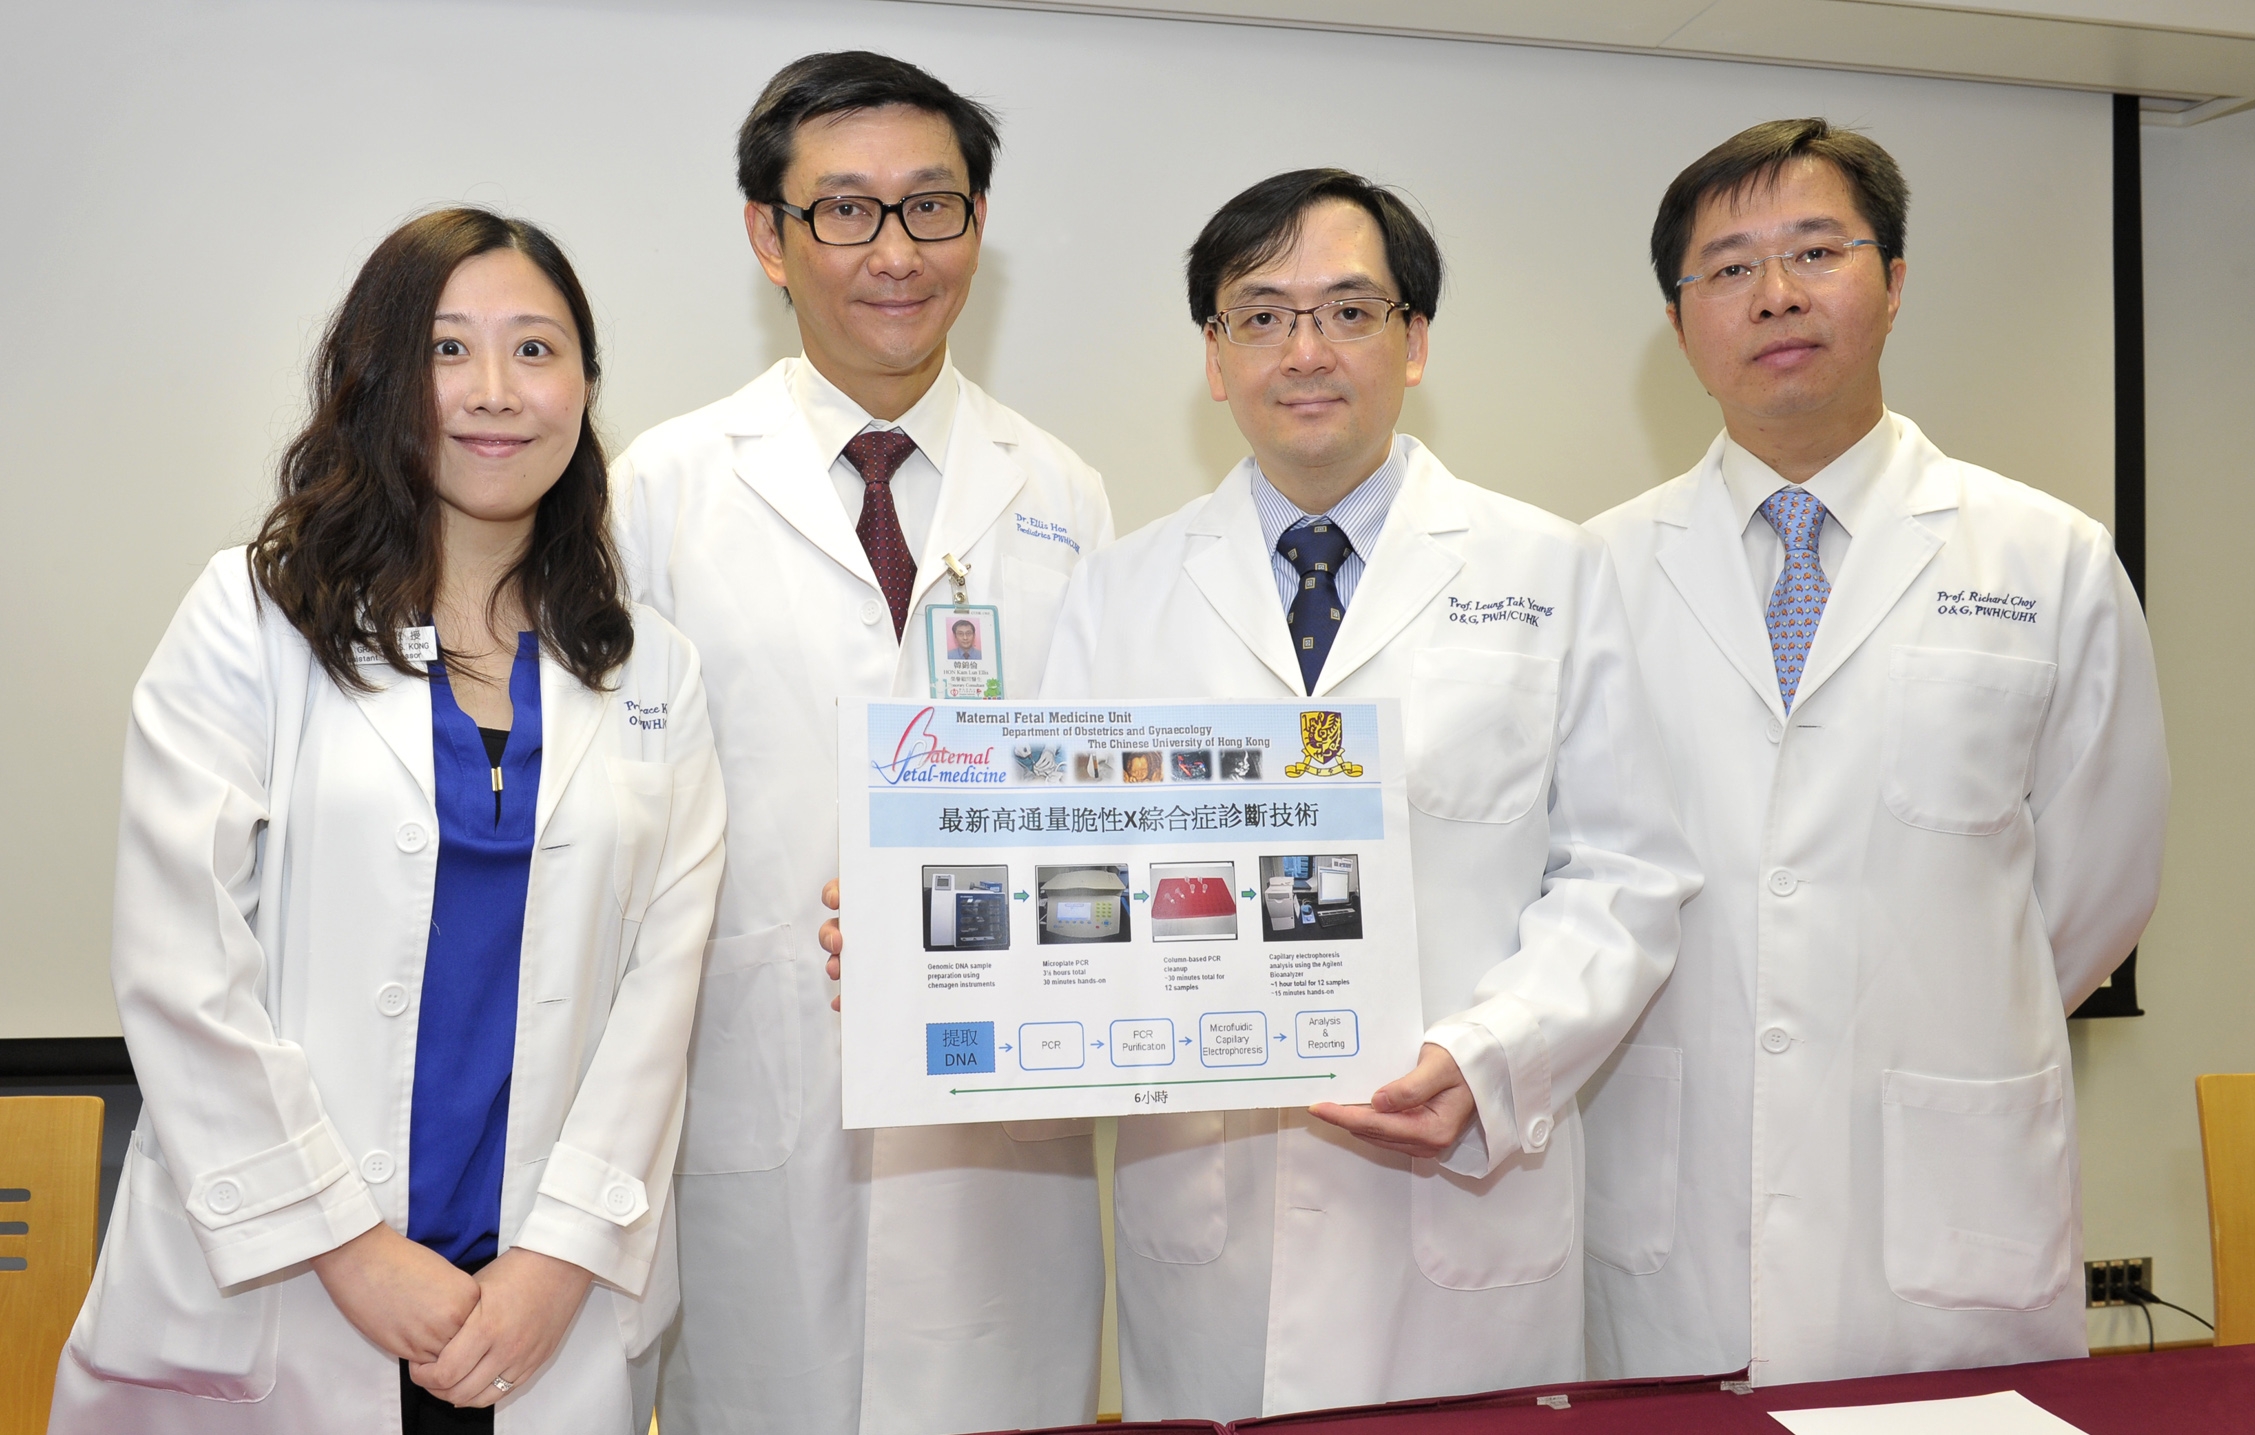 Professor Tak Yeung Leung (right 2), Professor; Professor Richard Kwong Wai Choy (right 1), Associate Professor and Prof. Grace Wing Shan Kong (left 1), Assistant Professor, Department of Obstetrics and Gynaecology and Prof. Ellis Kam Lum Hon (left 2), Professor, Department of Paediatrics at CUHK present the strengths of the CUHK's new PCR technology in delivery of faster and more accurate results, and suitable for large-scale screening than Fragile X screening methods such as Southern blot analysis and conventional PCR method.